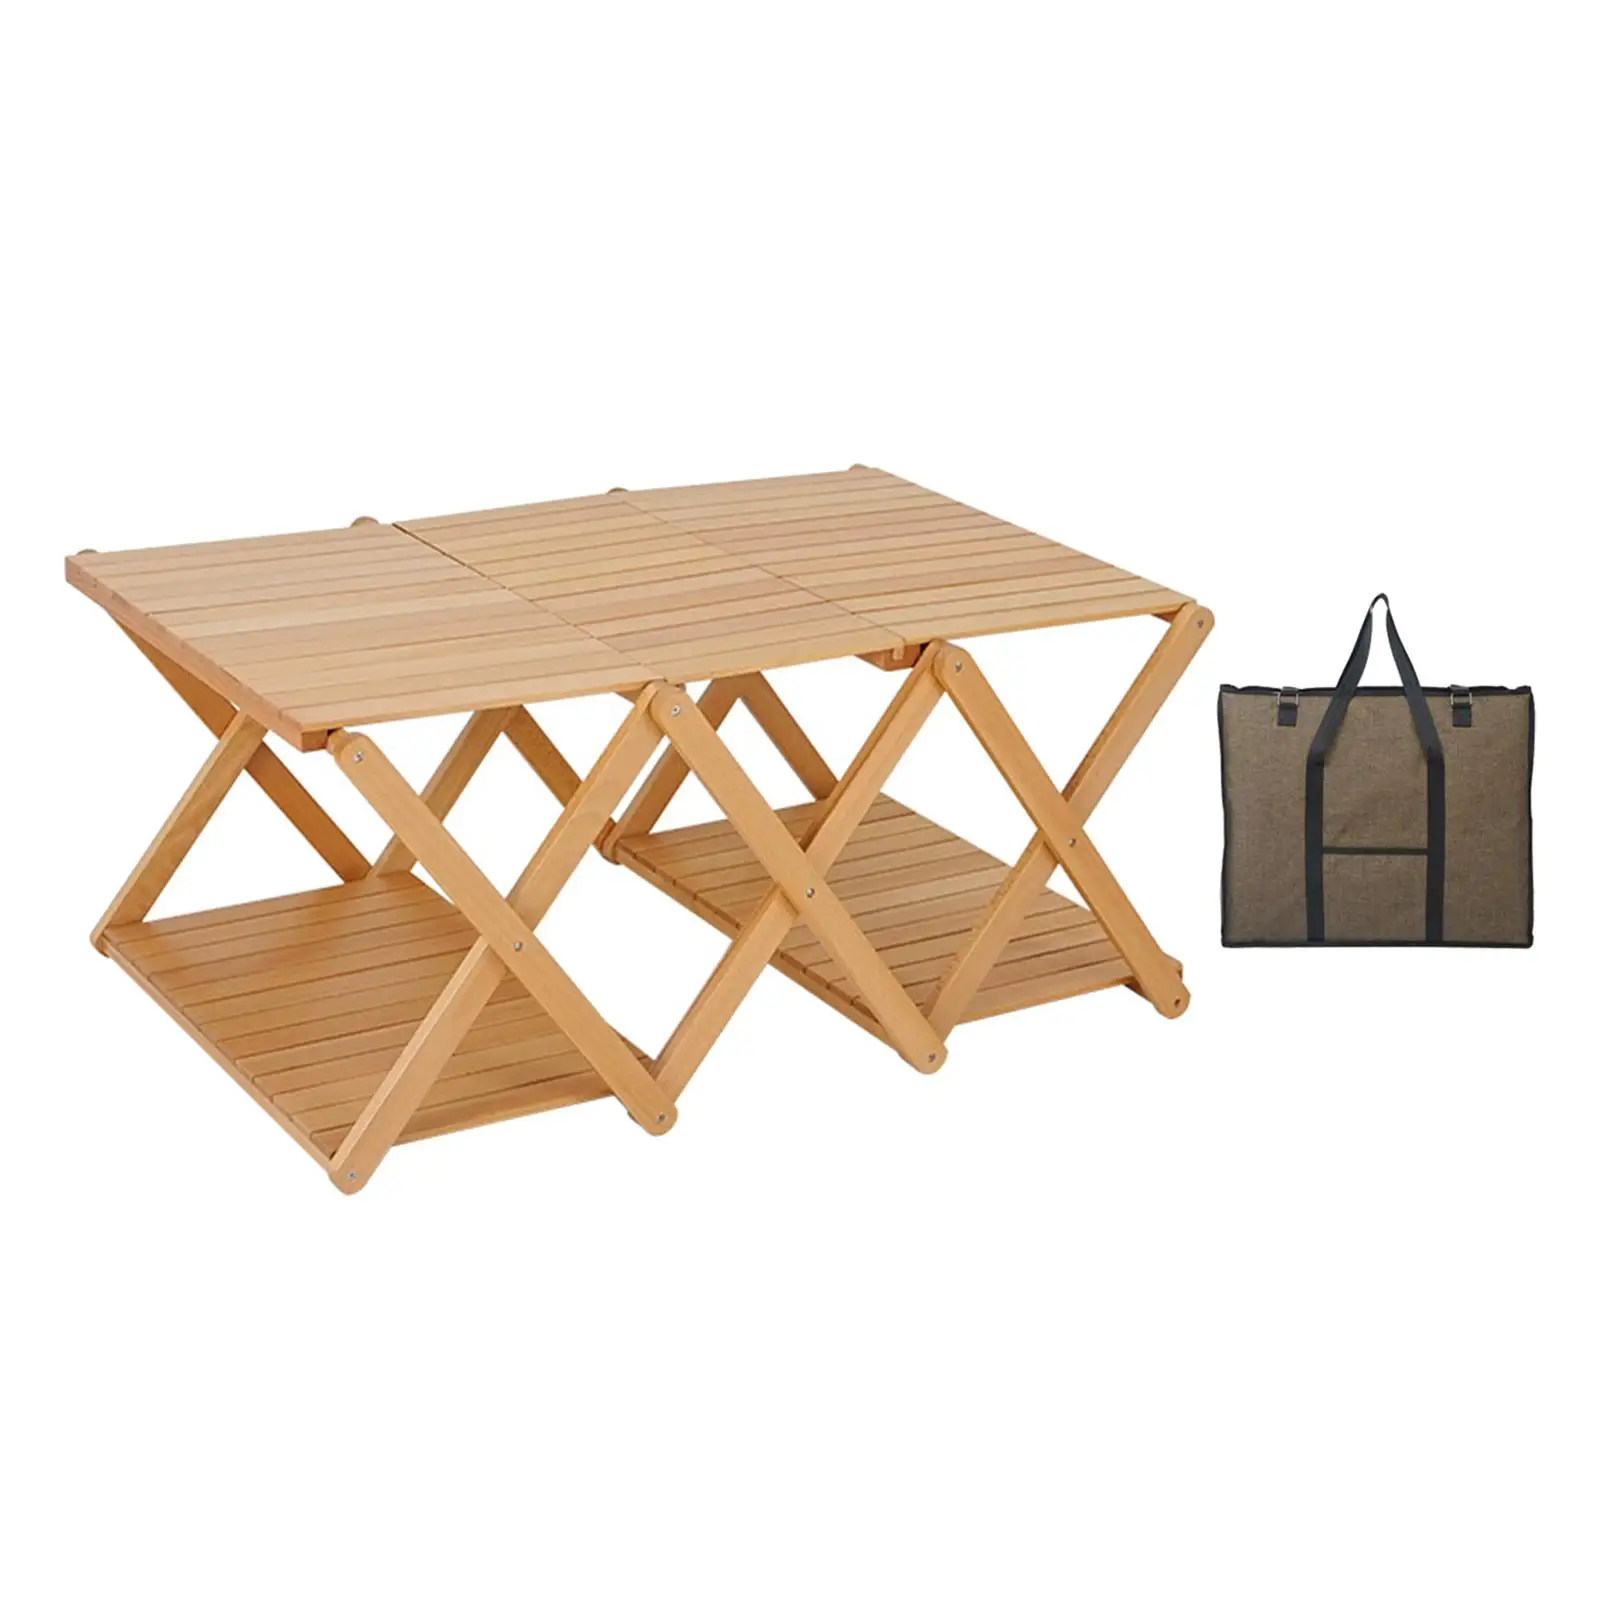 Solid Wood Folding Table Wood Portable Camping Table Picnics Furniture Outdoor